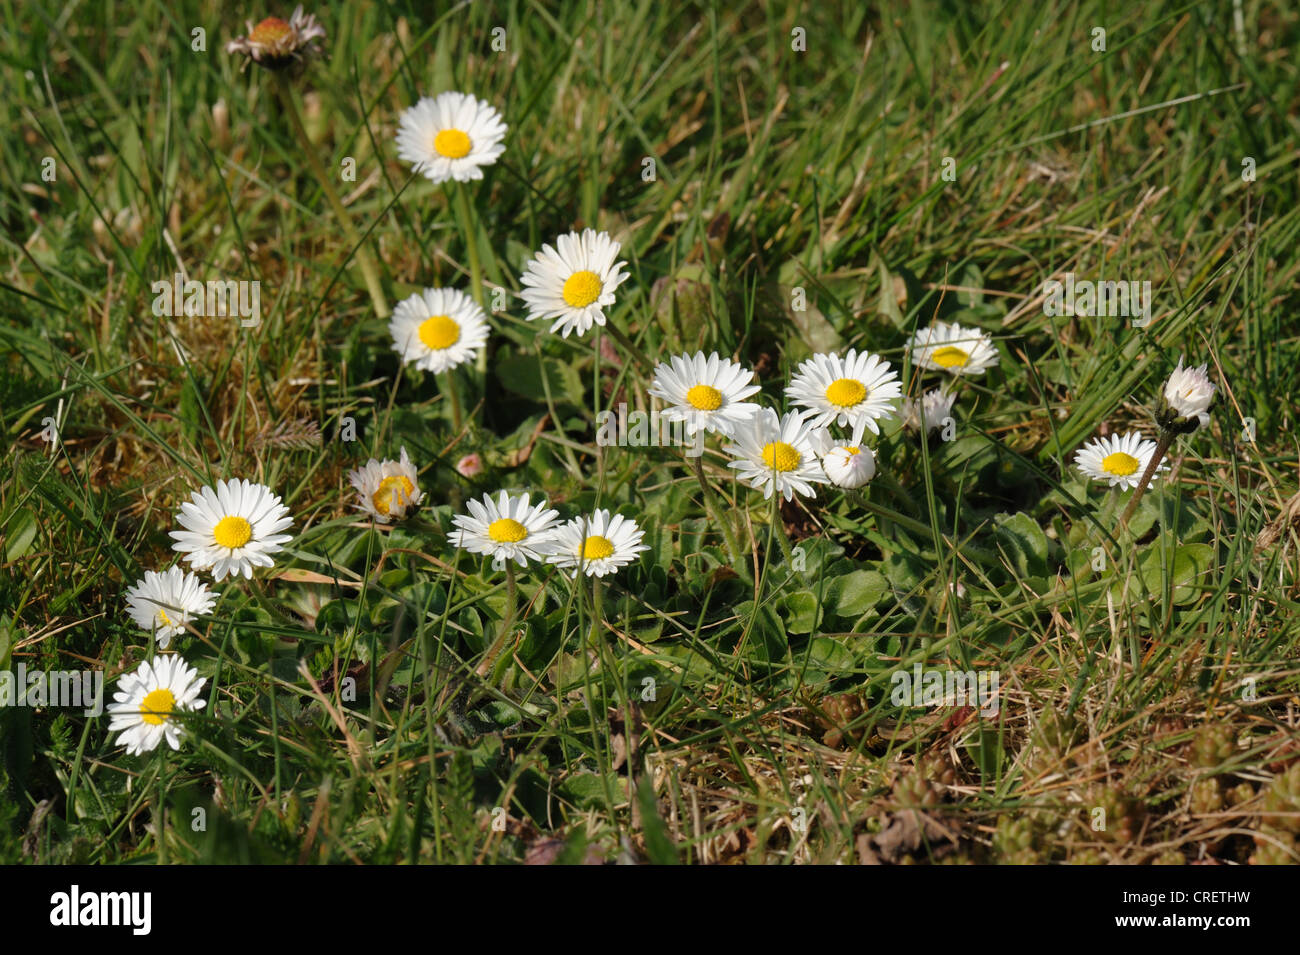 Ground level view of flowering daisy (Bellis perennis) in a garden lawn Stock Photo